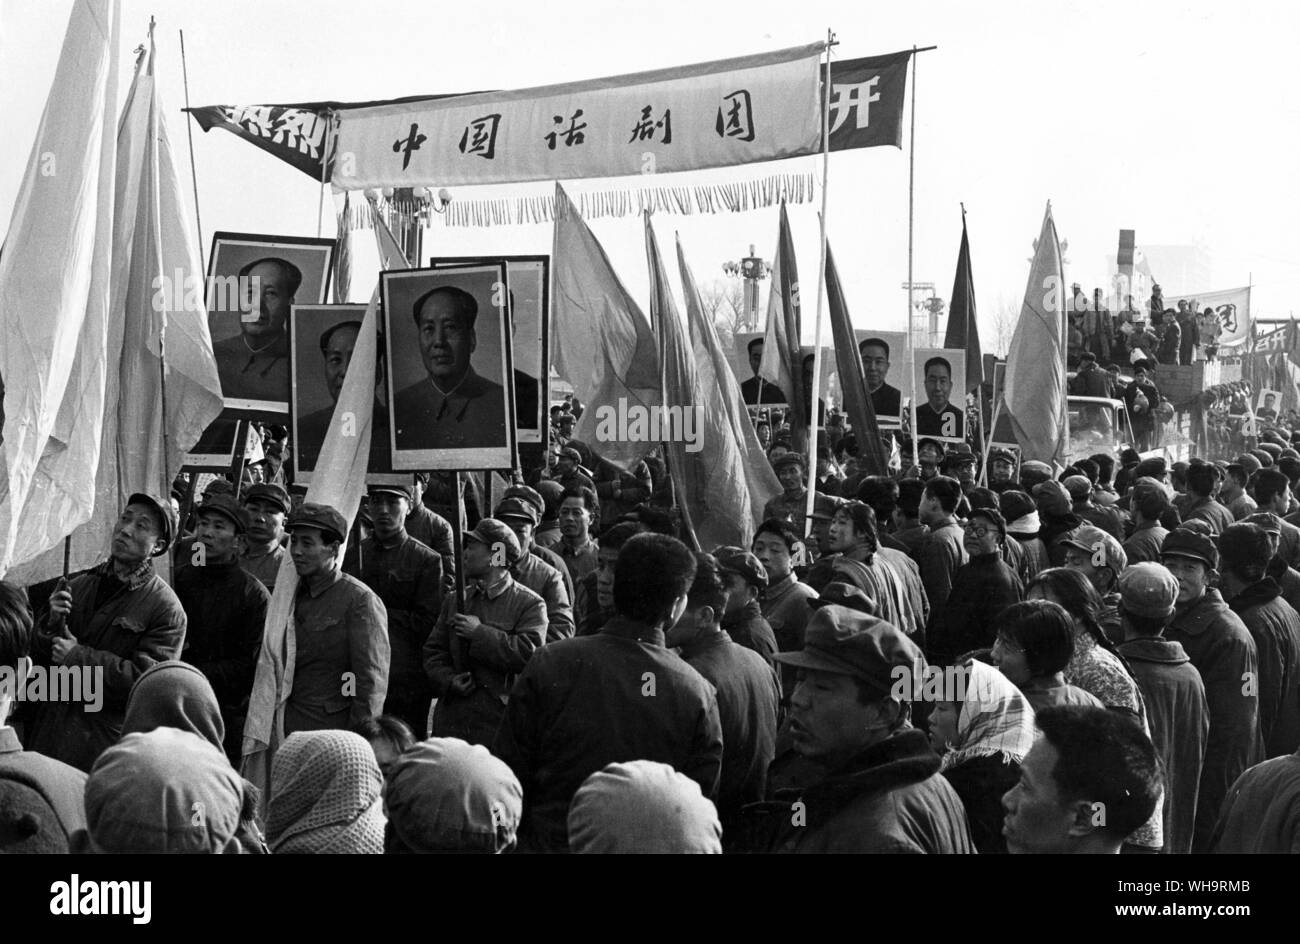 March 6th 1978: China, Peking. Portraits of the newly elected Chairman, Hua Kuo-feng and Mao Tse-Tung, during a festive parade in honour of the closing of the Fifth National People's Party Congress. Tien An Men Square. Stock Photo